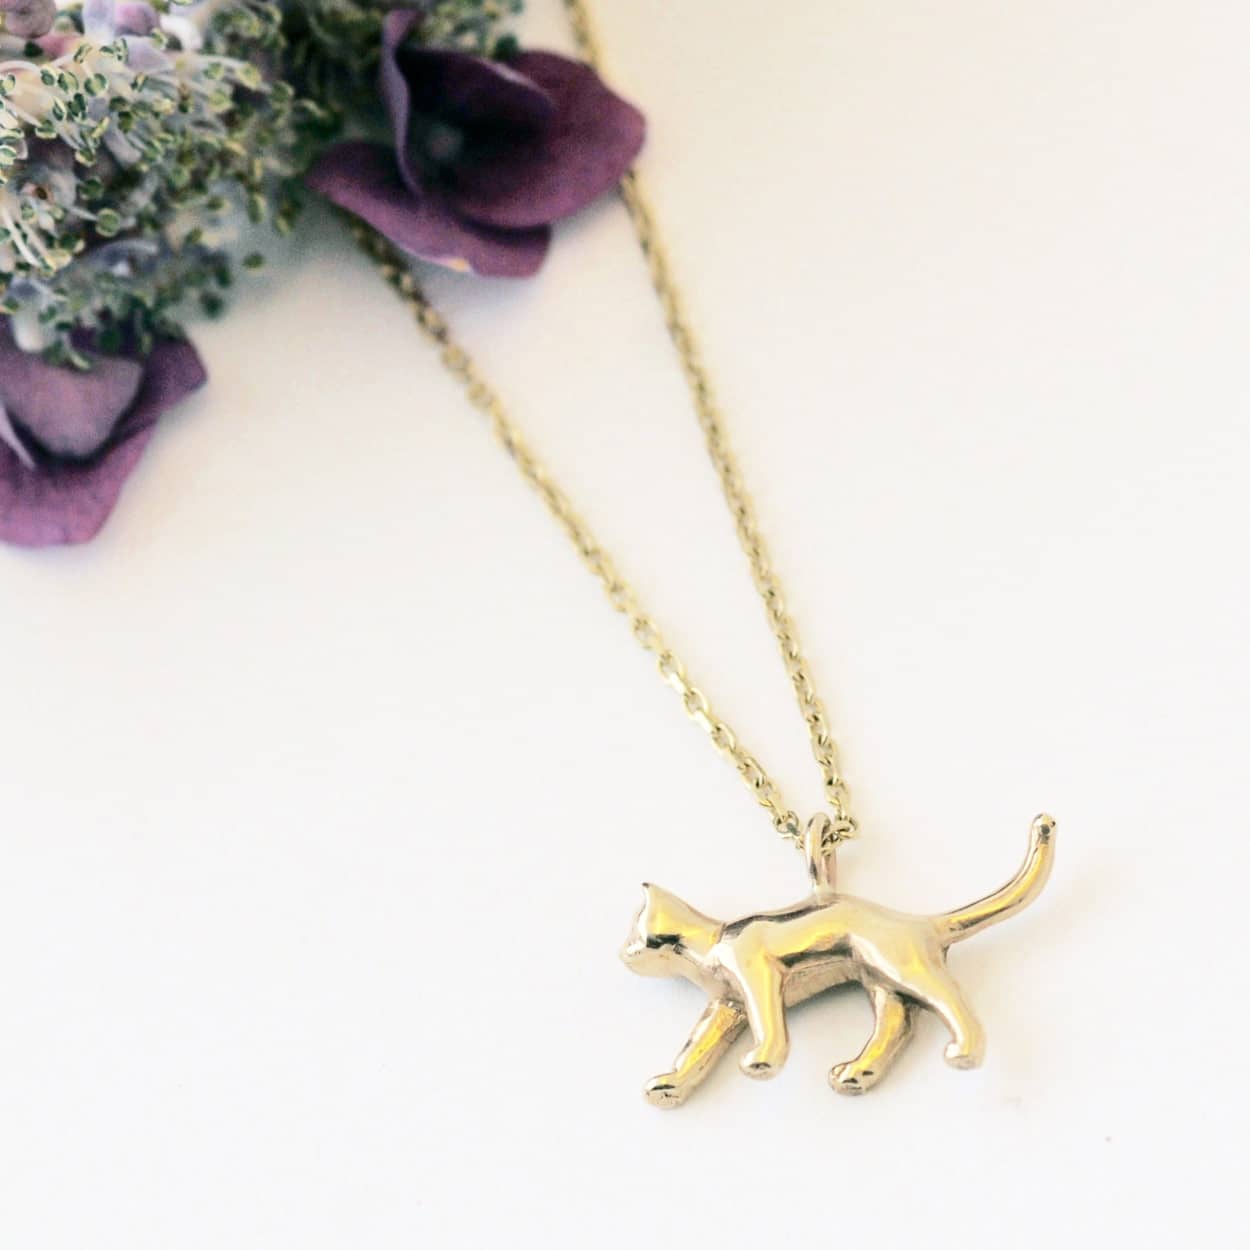 Cute Dangling Kitty Cat and Tiny Fish Shaped Charm Necklace – DOTOLY